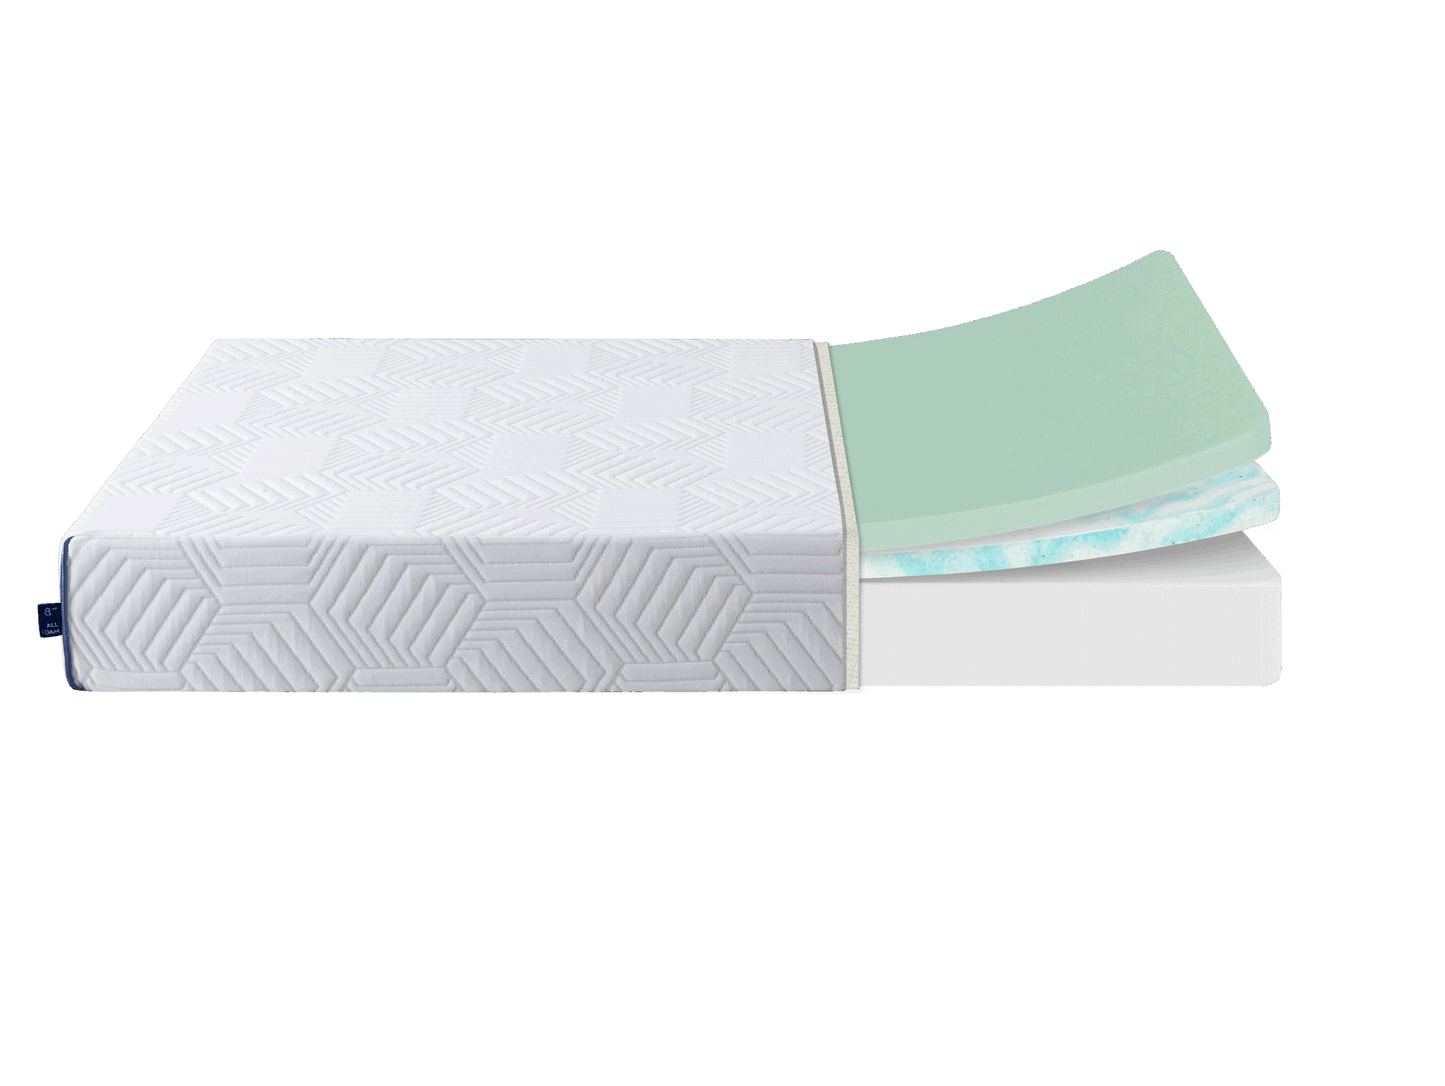 twin 12 inch gel memory foam mattress, white, bed in a box, green tea and cooling gel infused, certipur-us certified